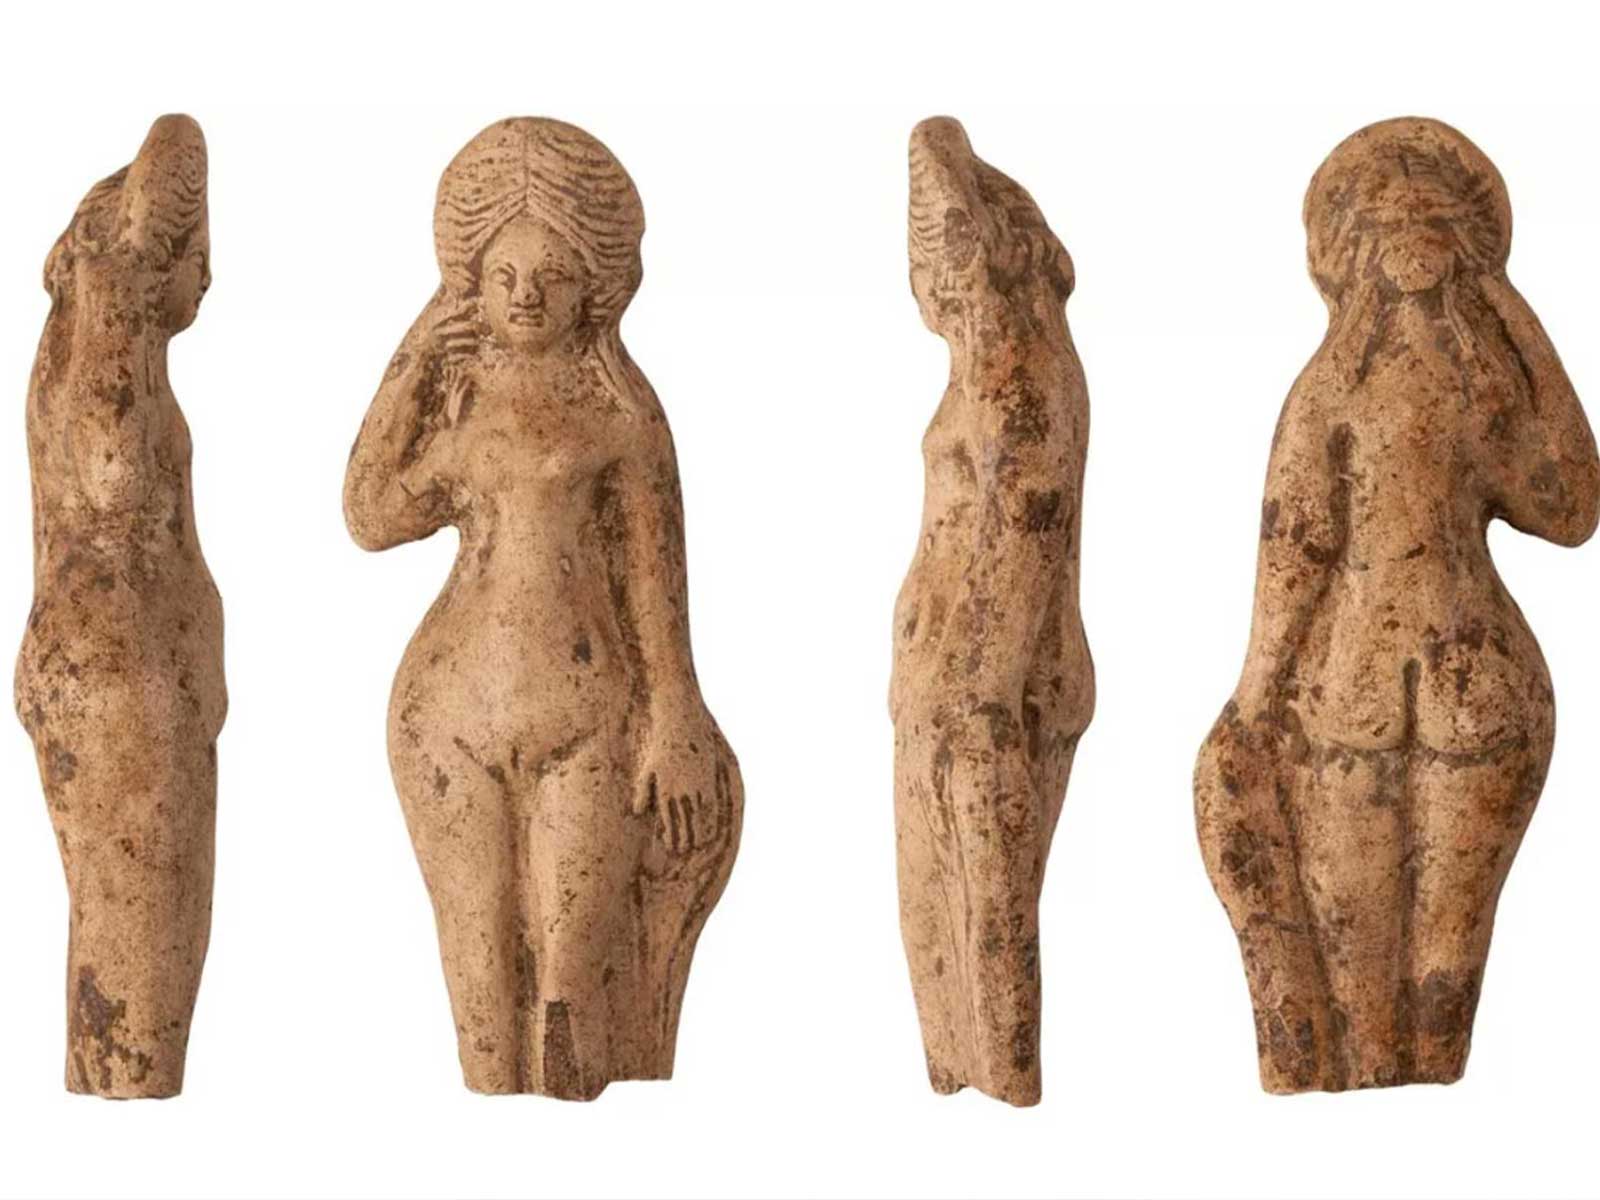 1,800-year-old Venus statues found in France